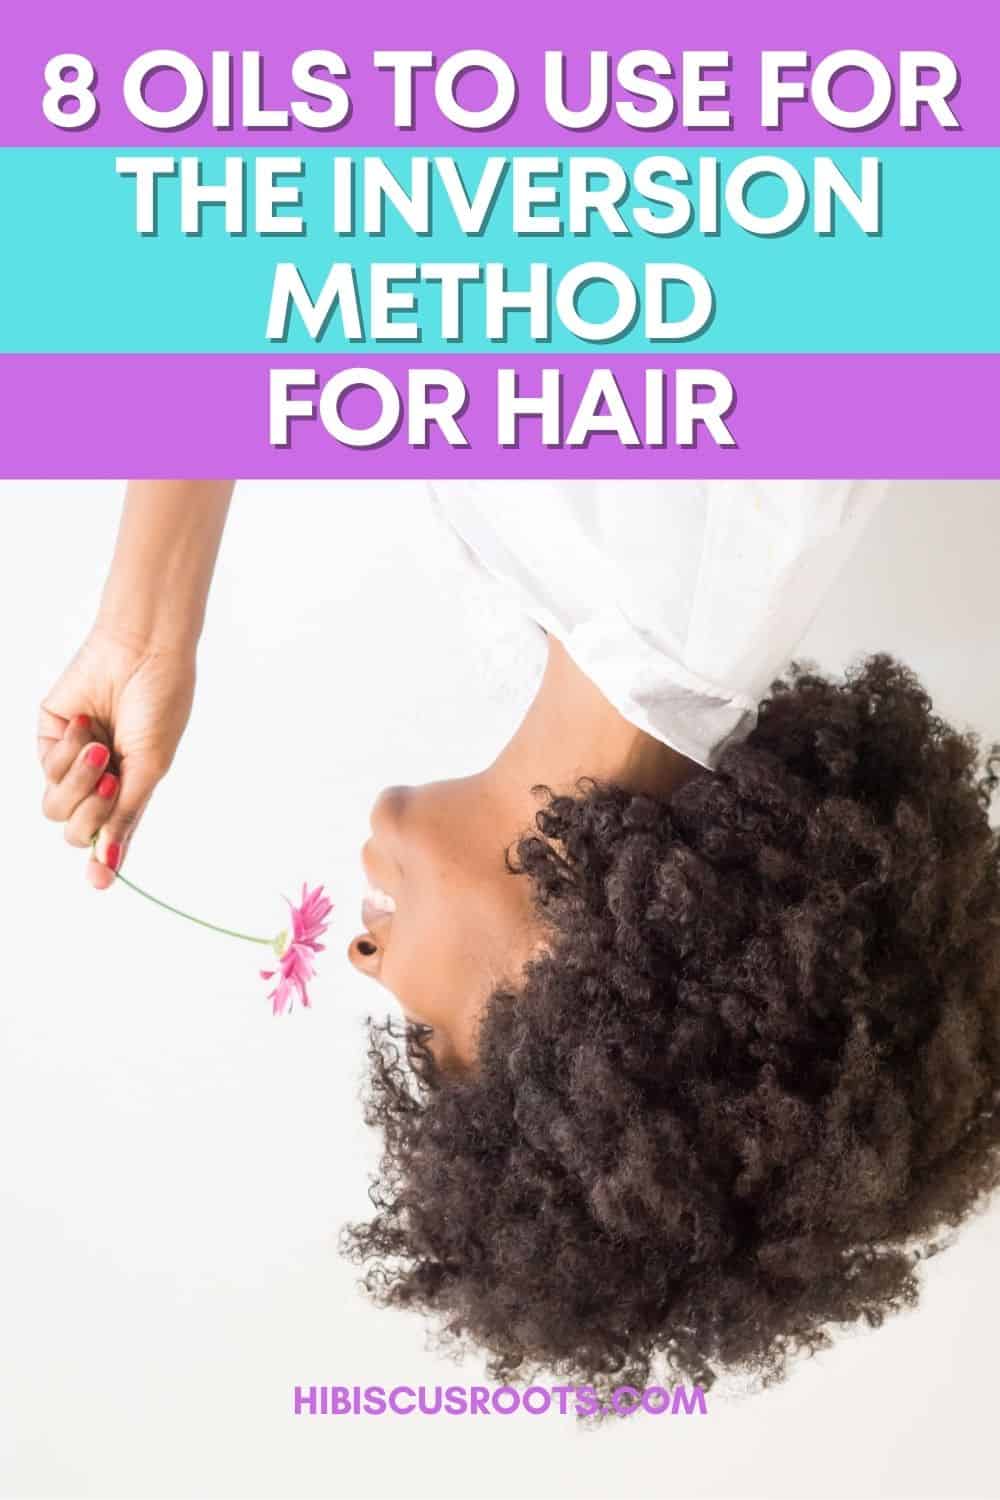 The Inversion Method for Hair Growth (Debunked!)